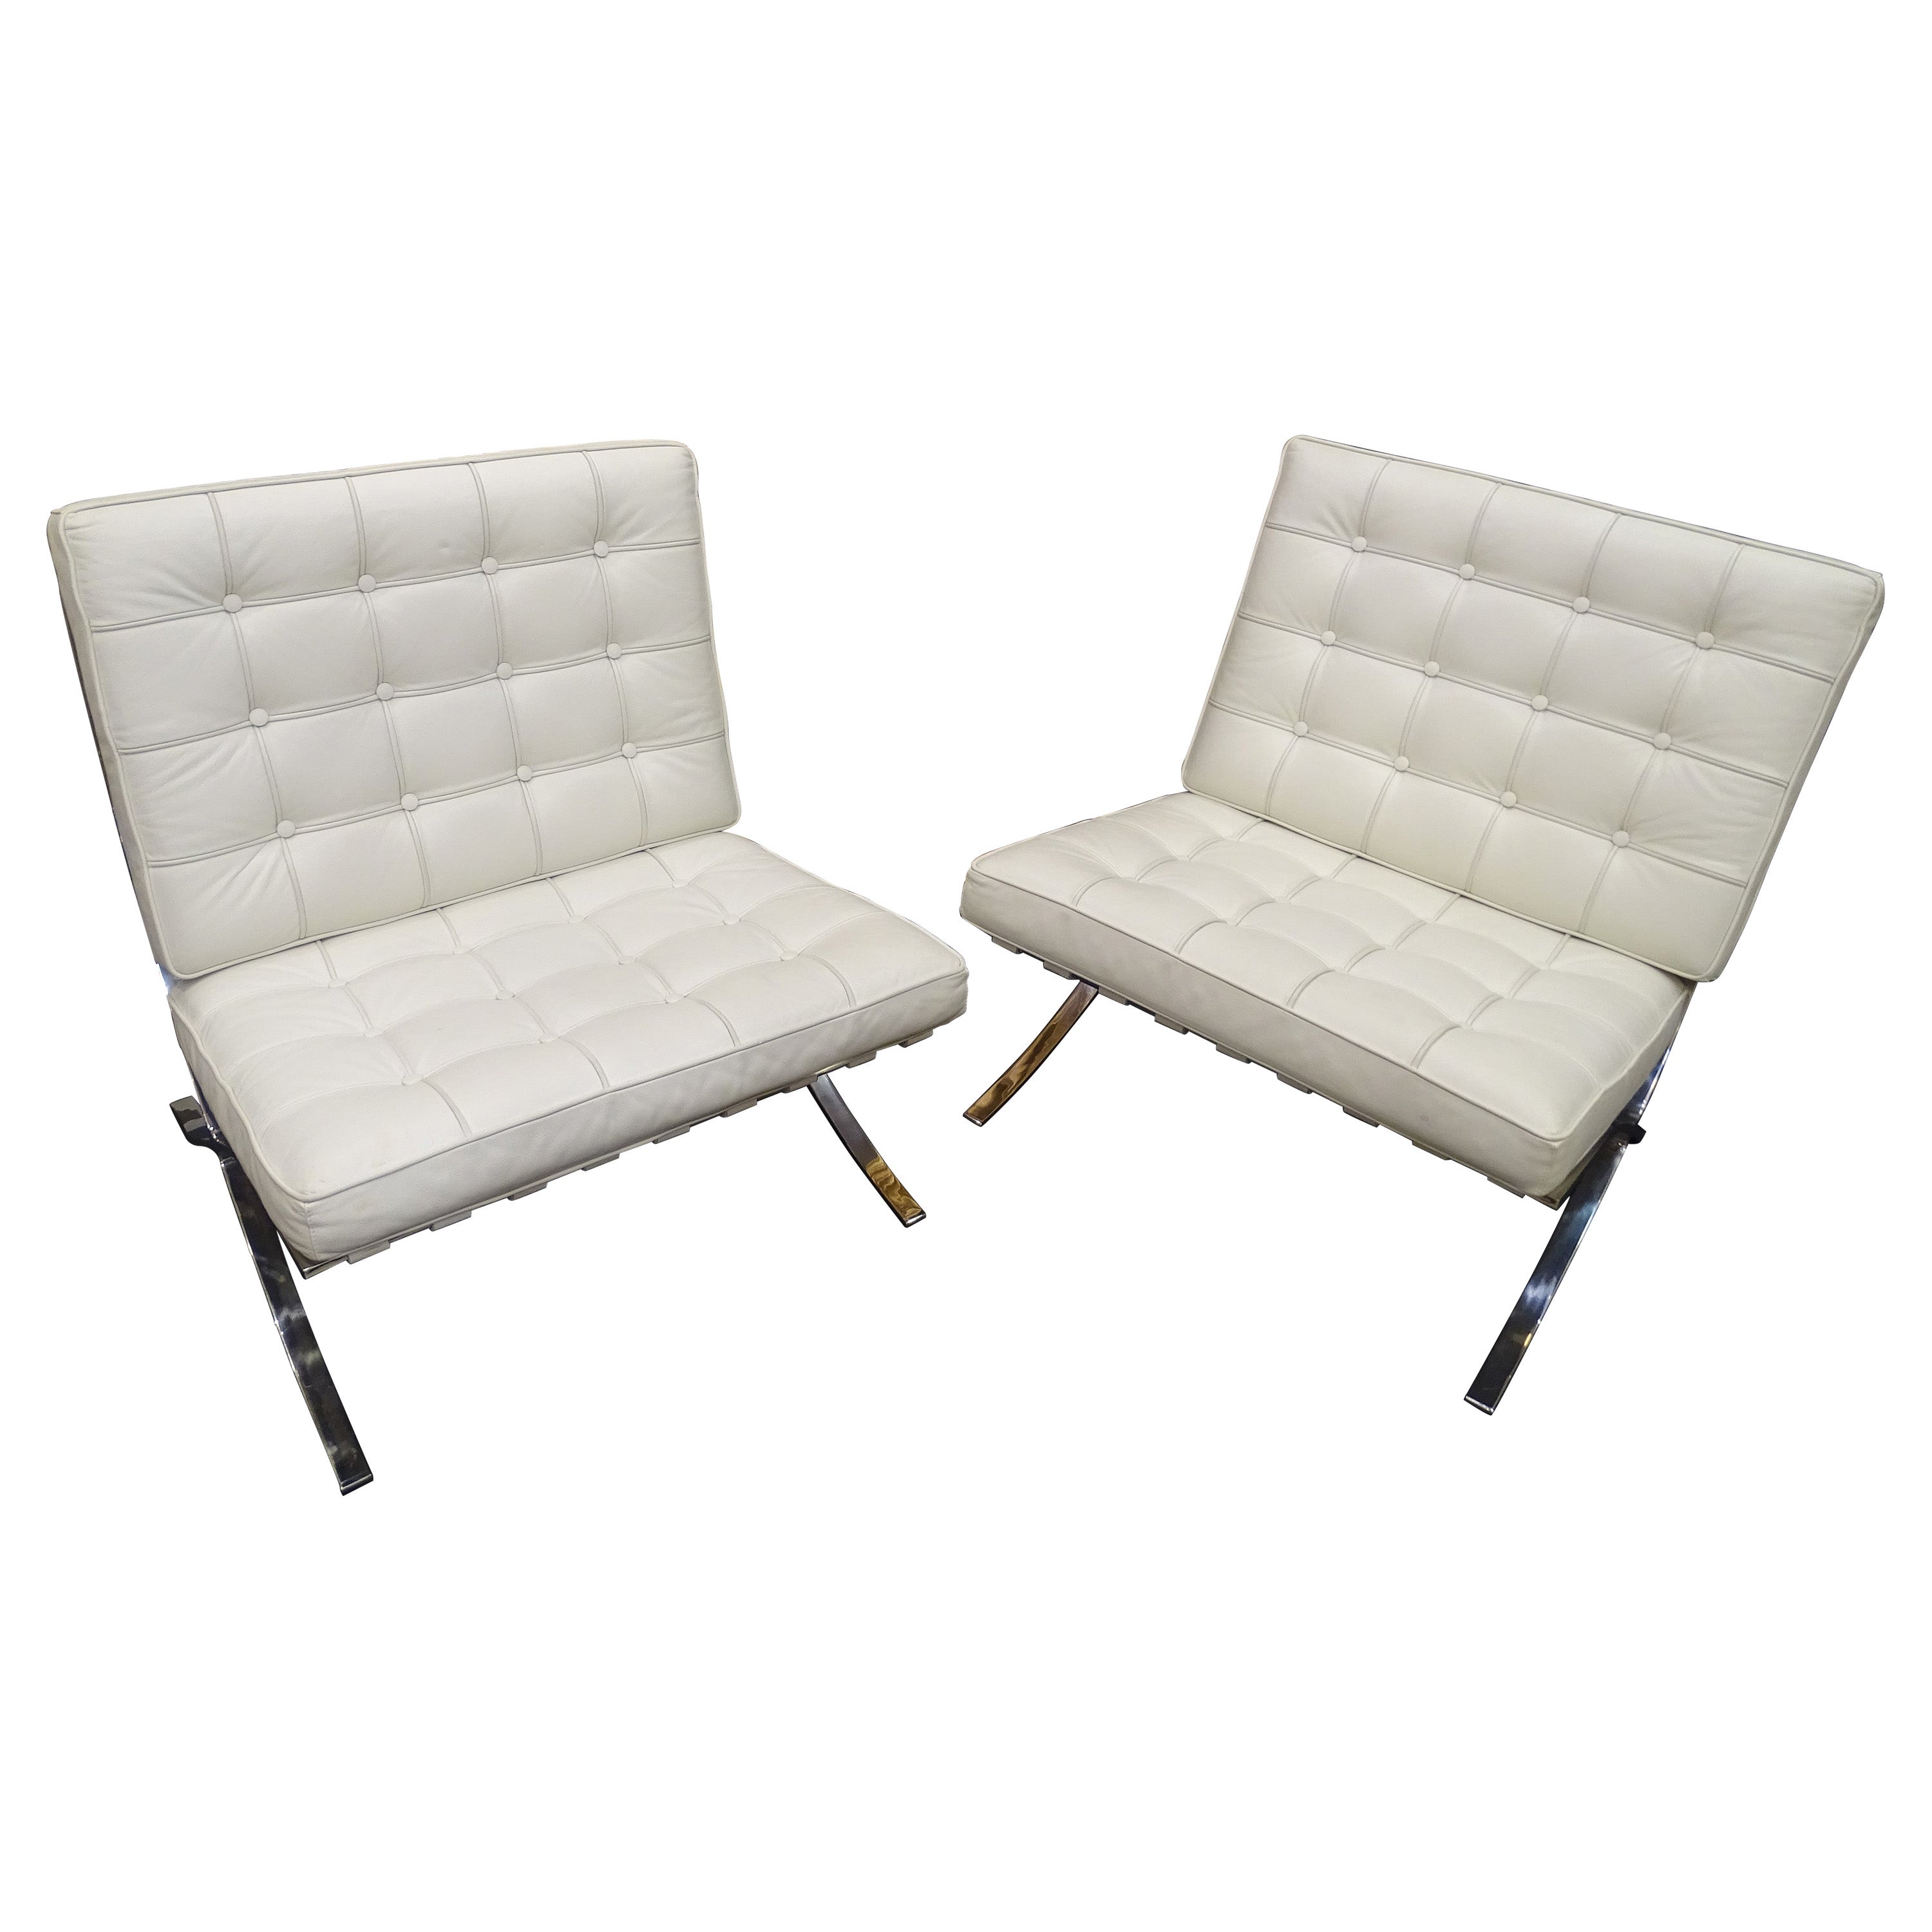 70s Mies van der Rohe "Barcelona "white leather pair of chairs, amchairs